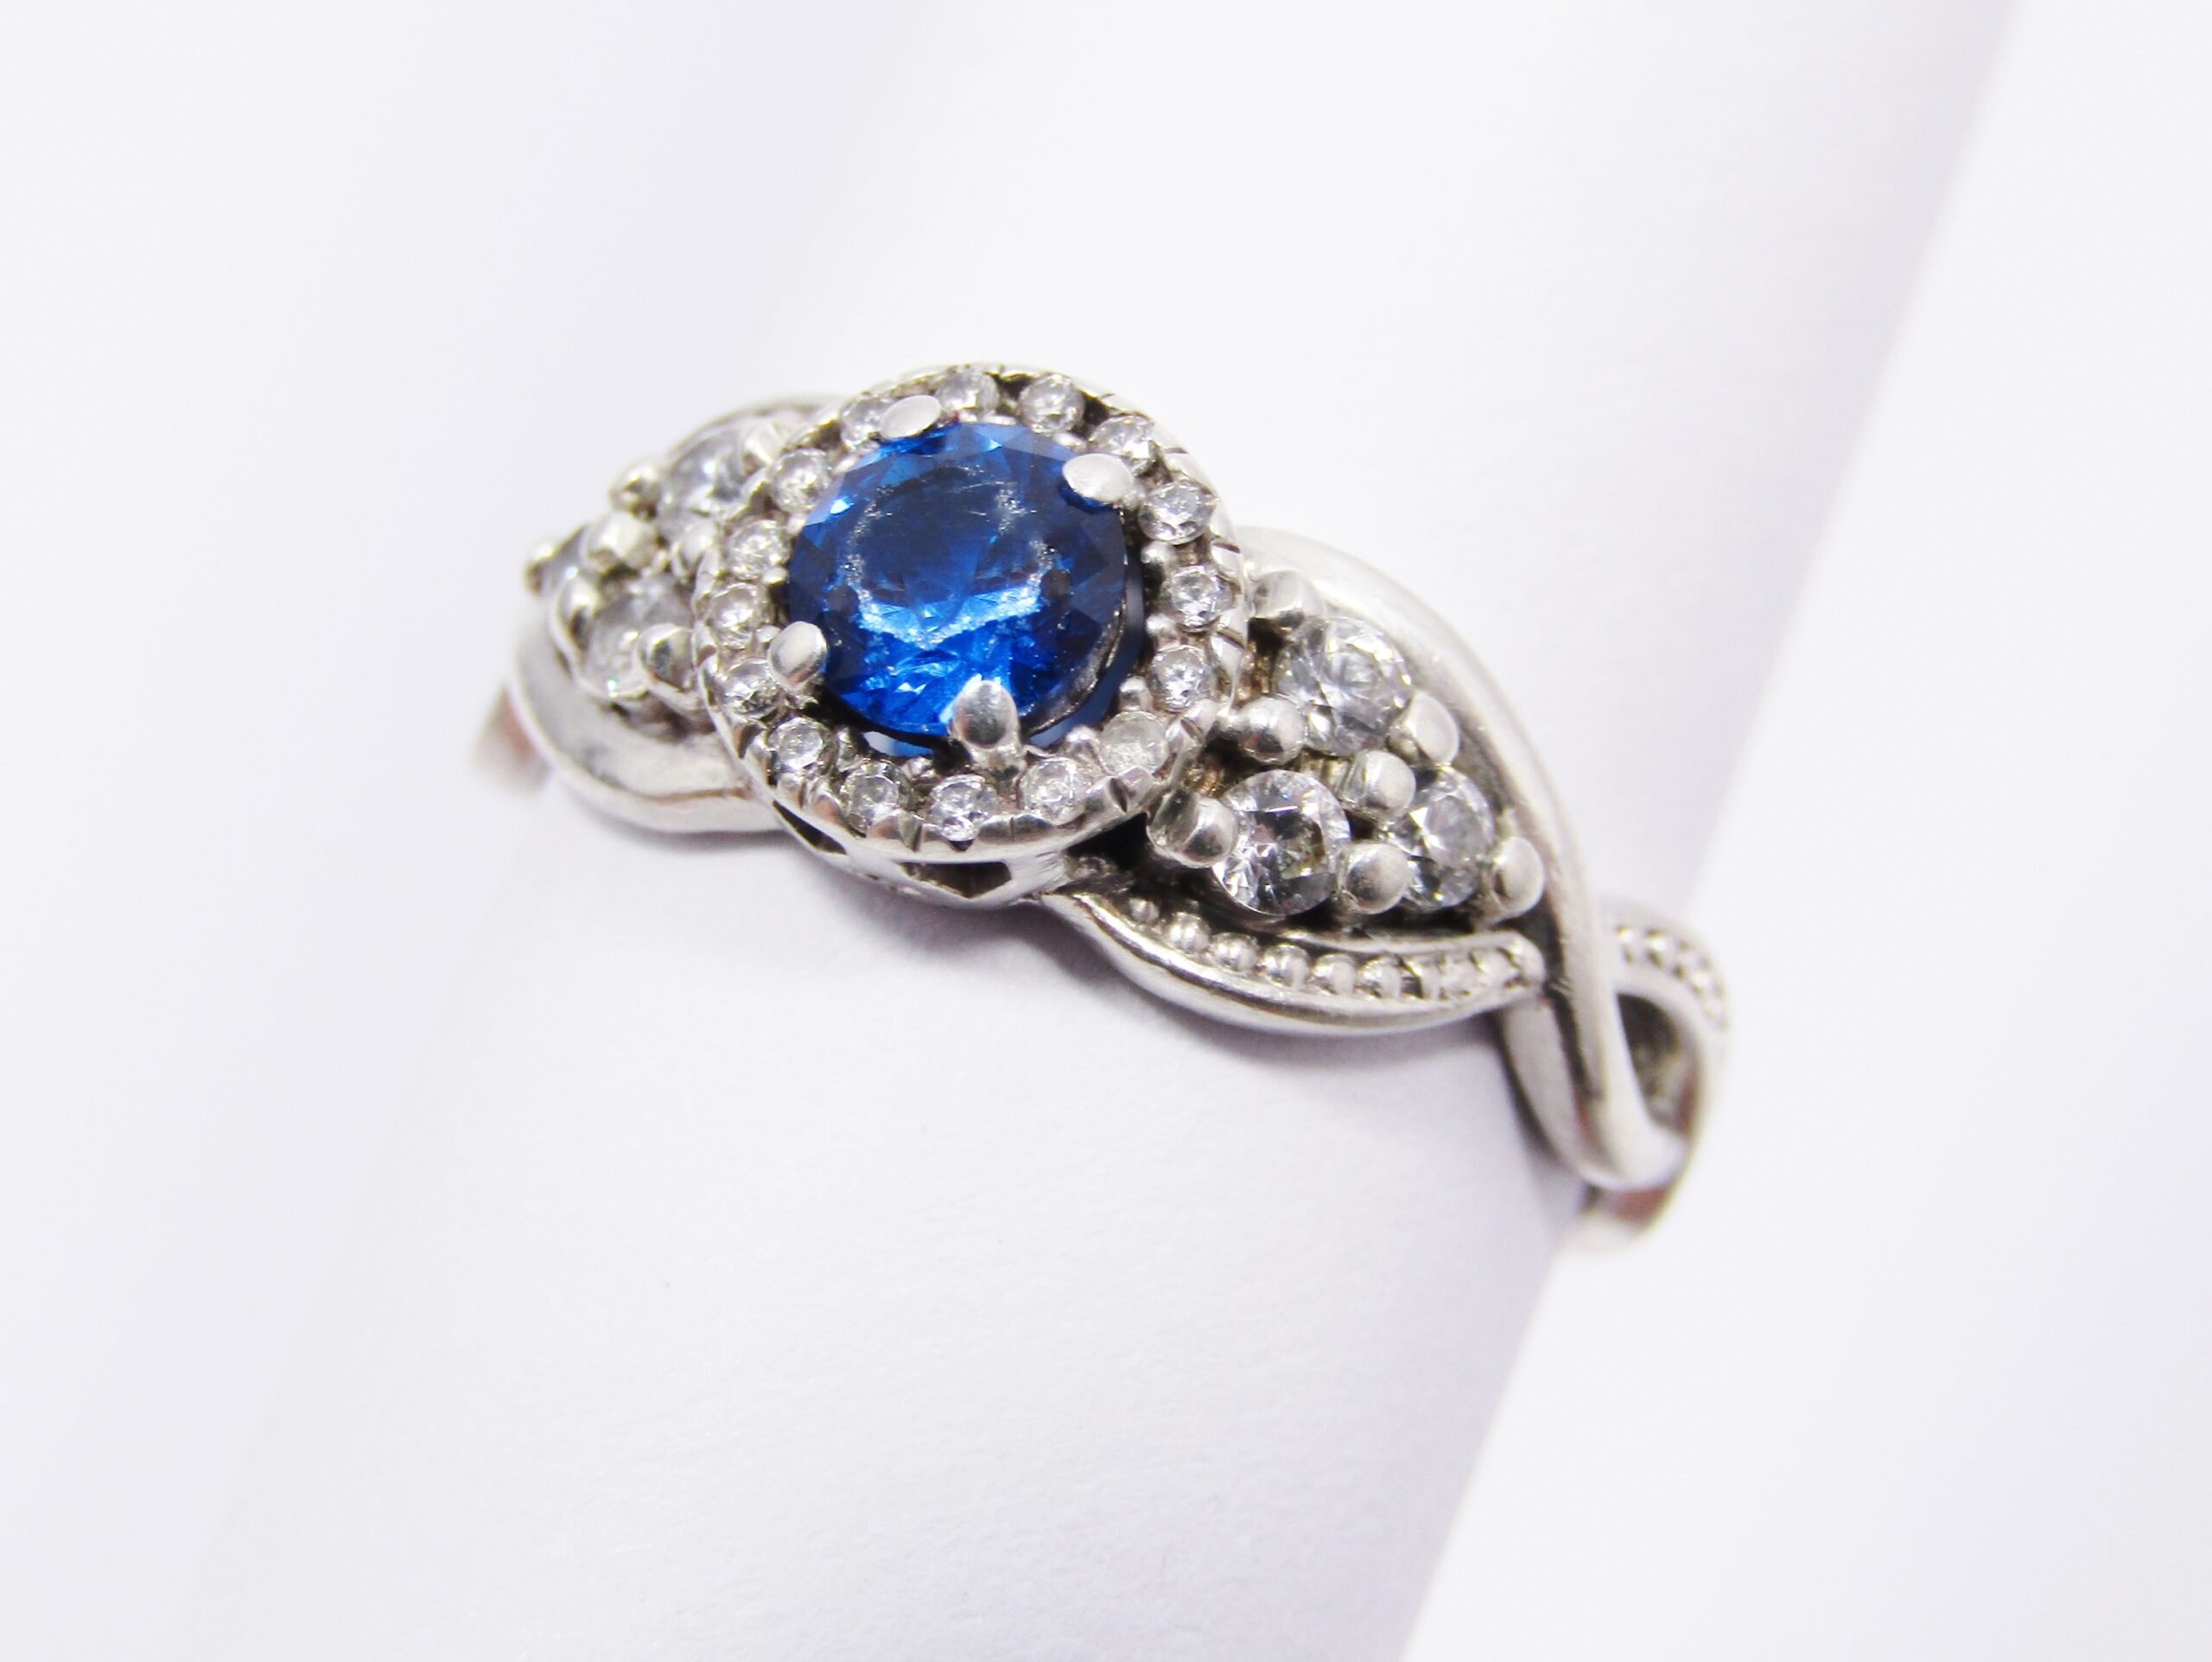 A Very Pretty Vintage Design Blue Zirconia Ring in Sterling Silver.